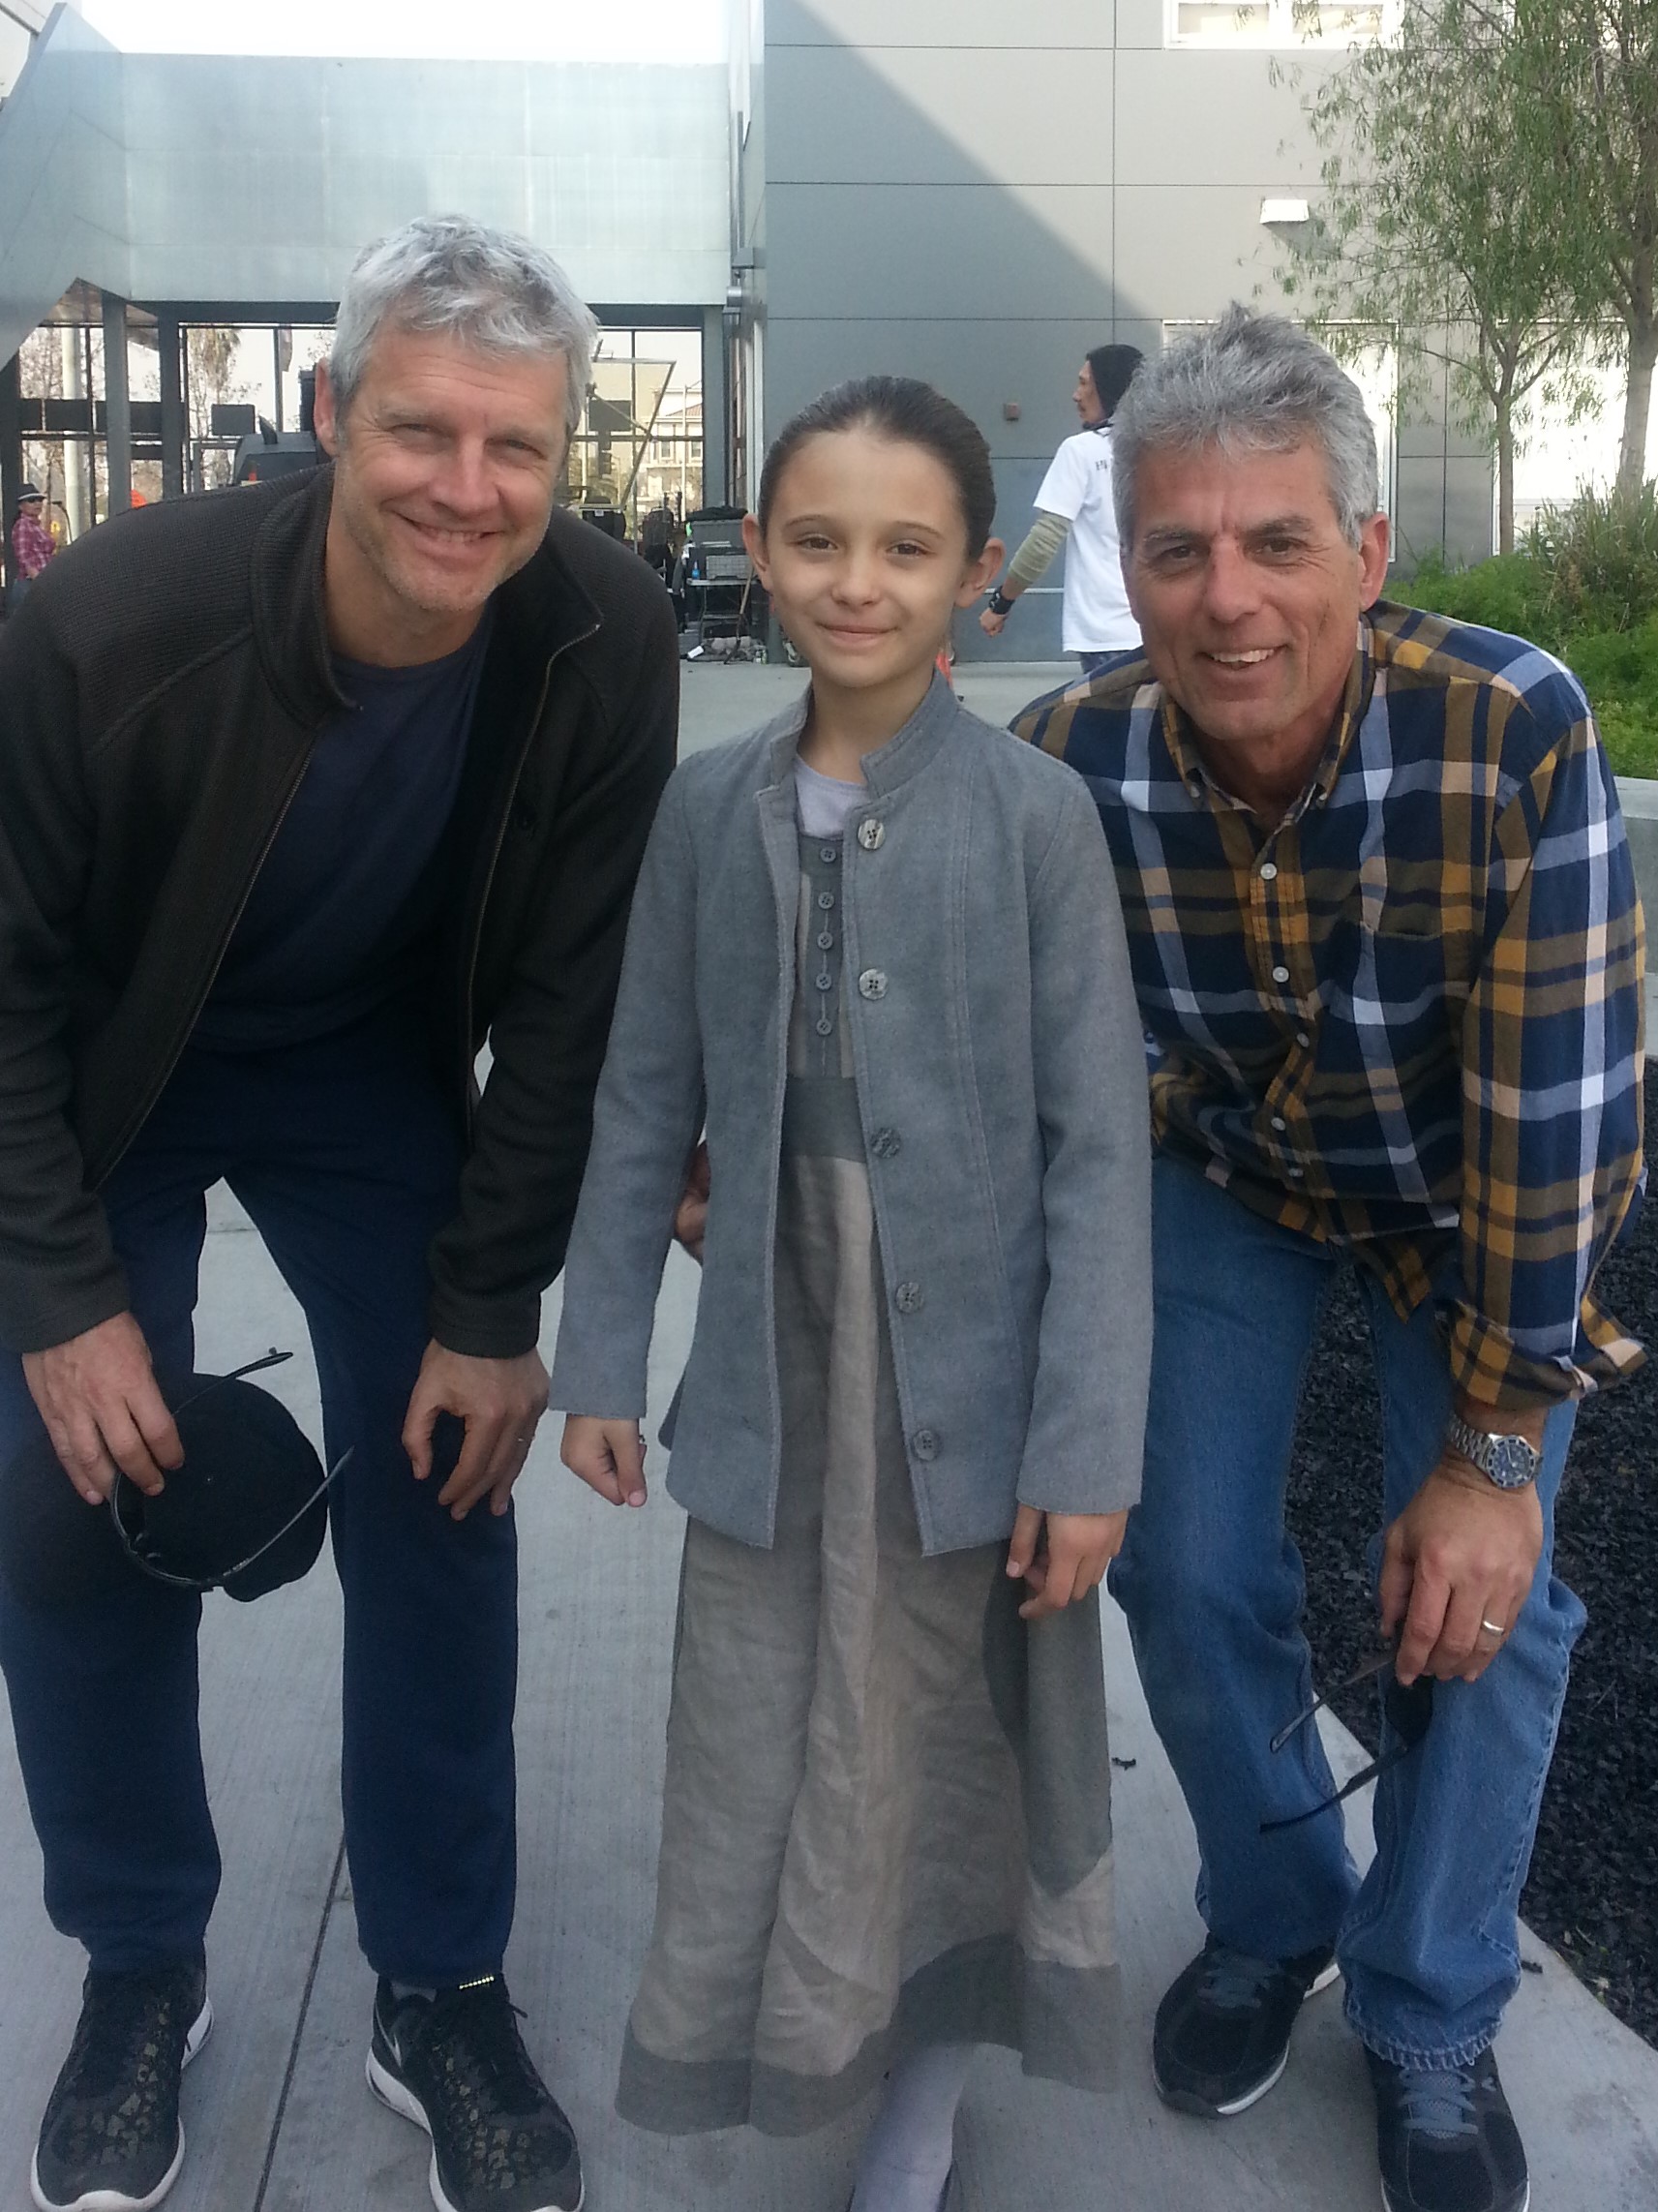 Elyse with Neil Burger, Director and Artist W. Robinson, 1st AD, Divergent.